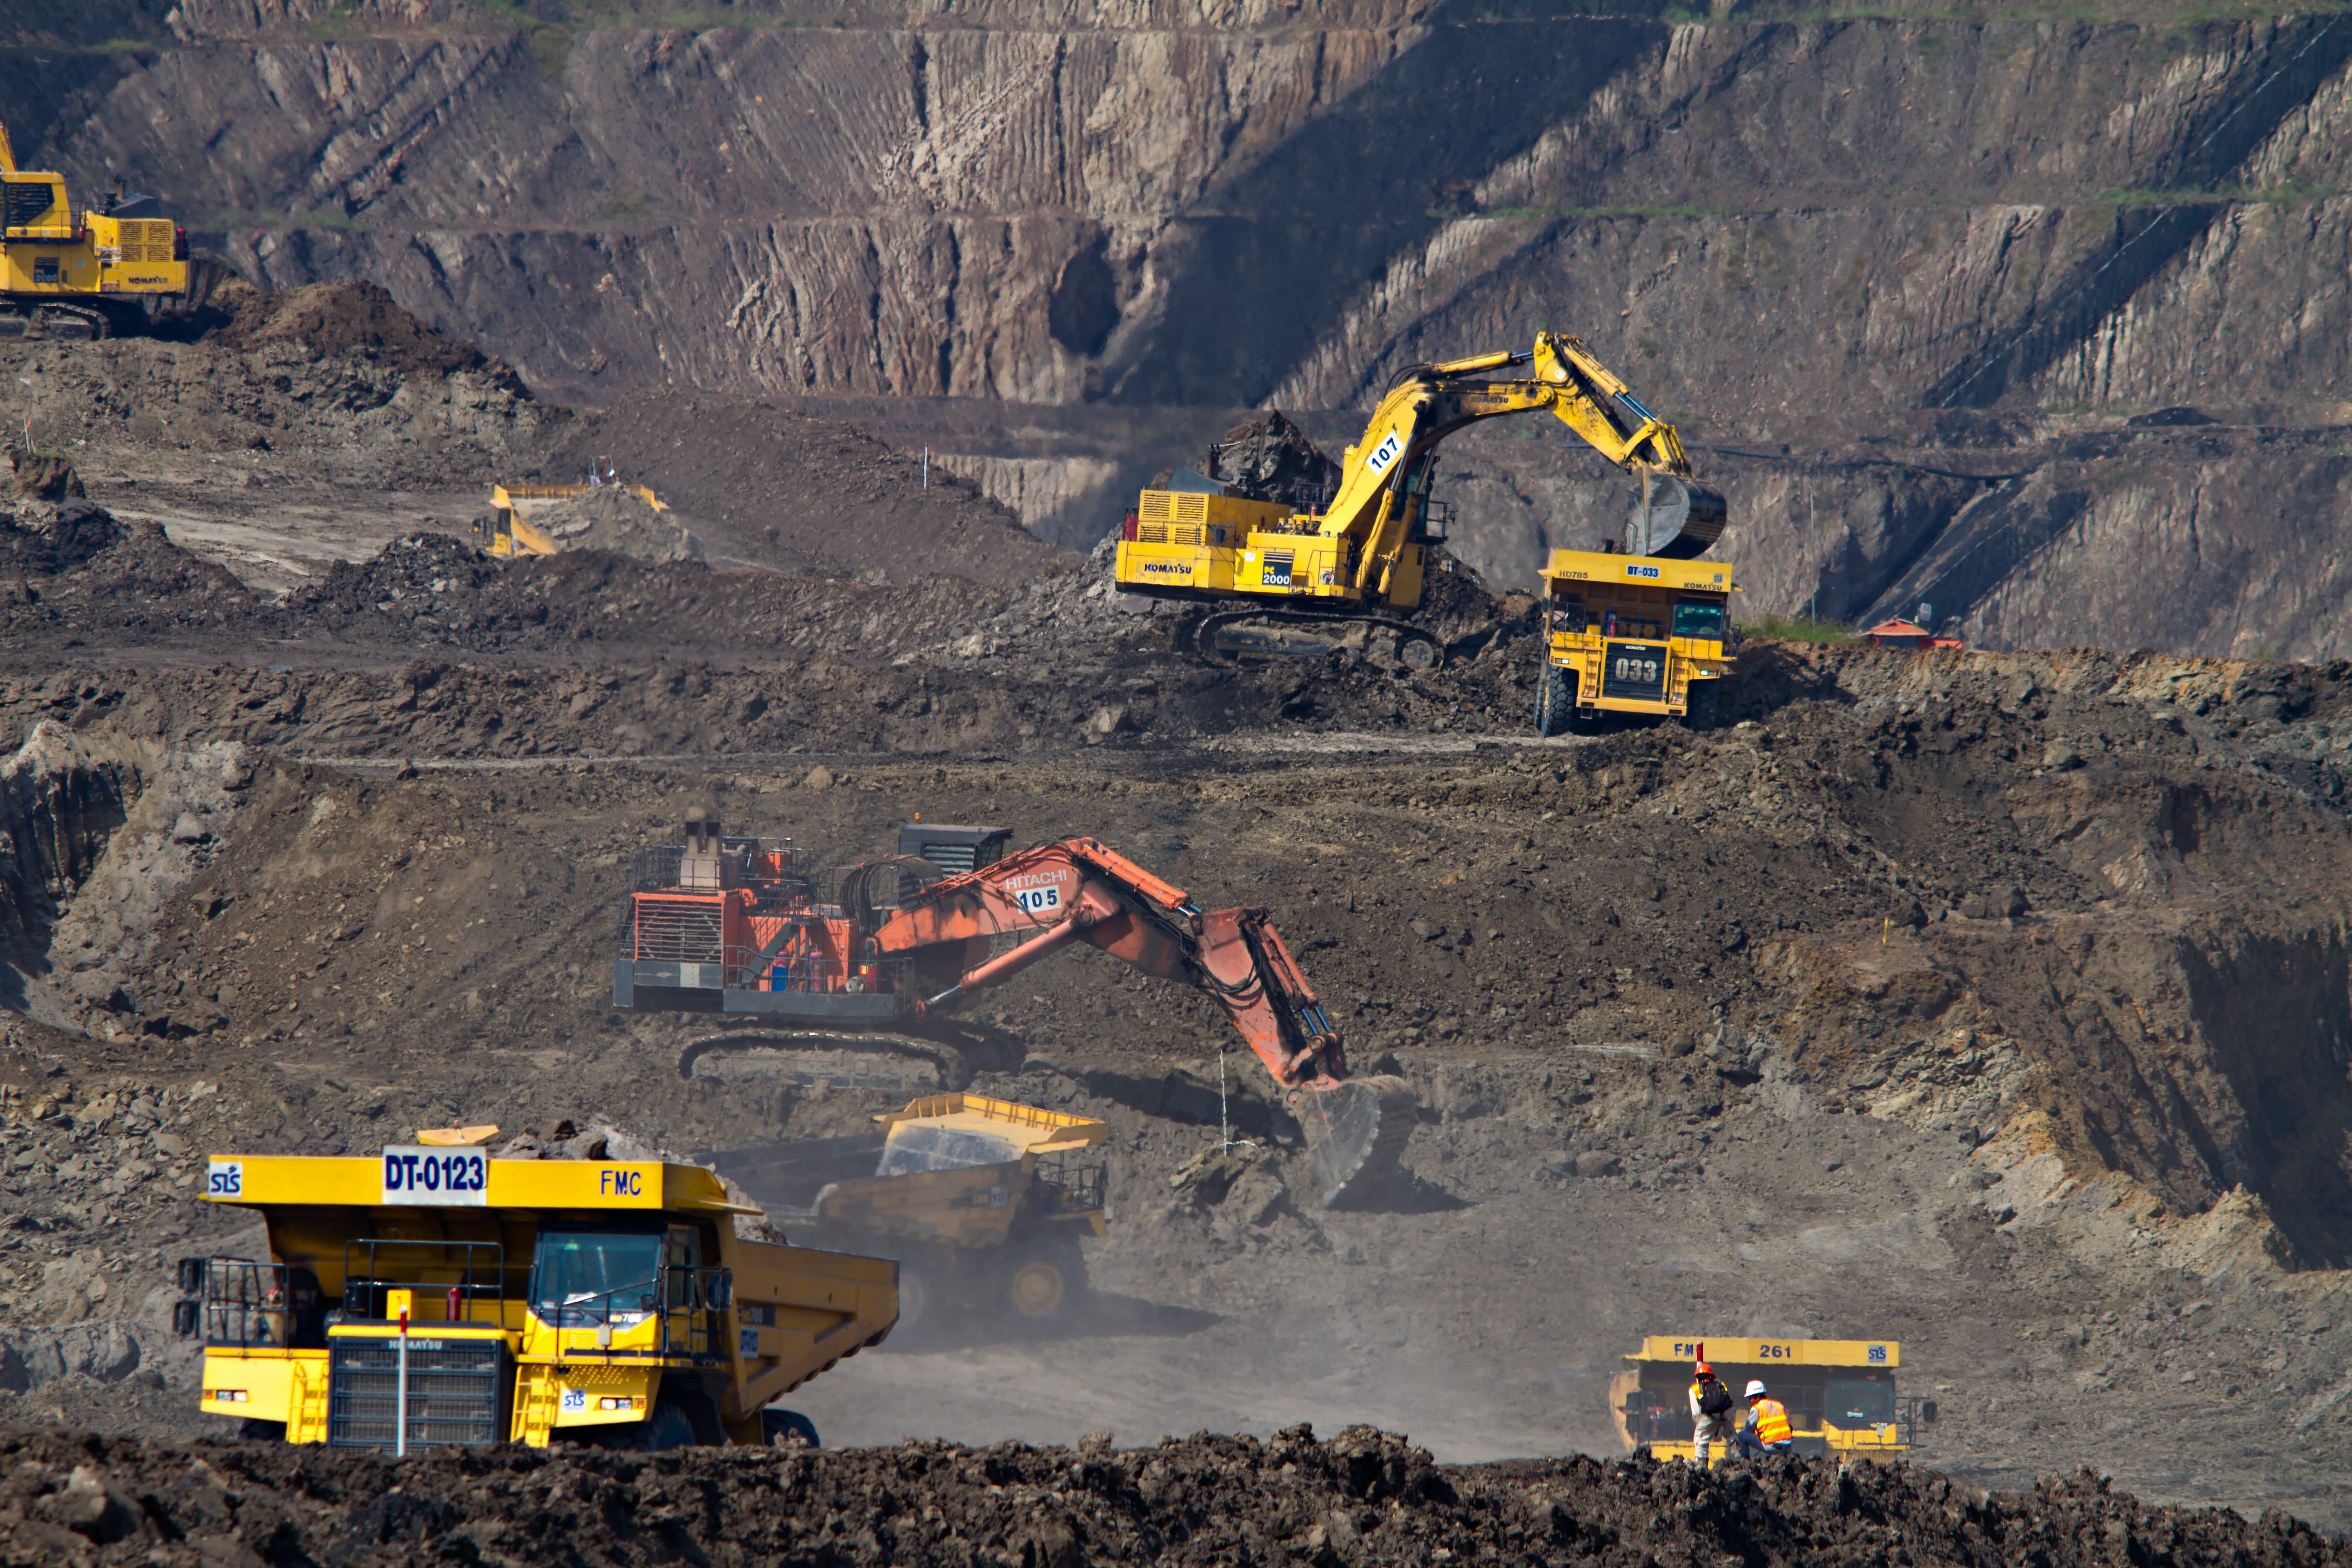 photographed while on an assignment for Indonesia’s largest coal mining company